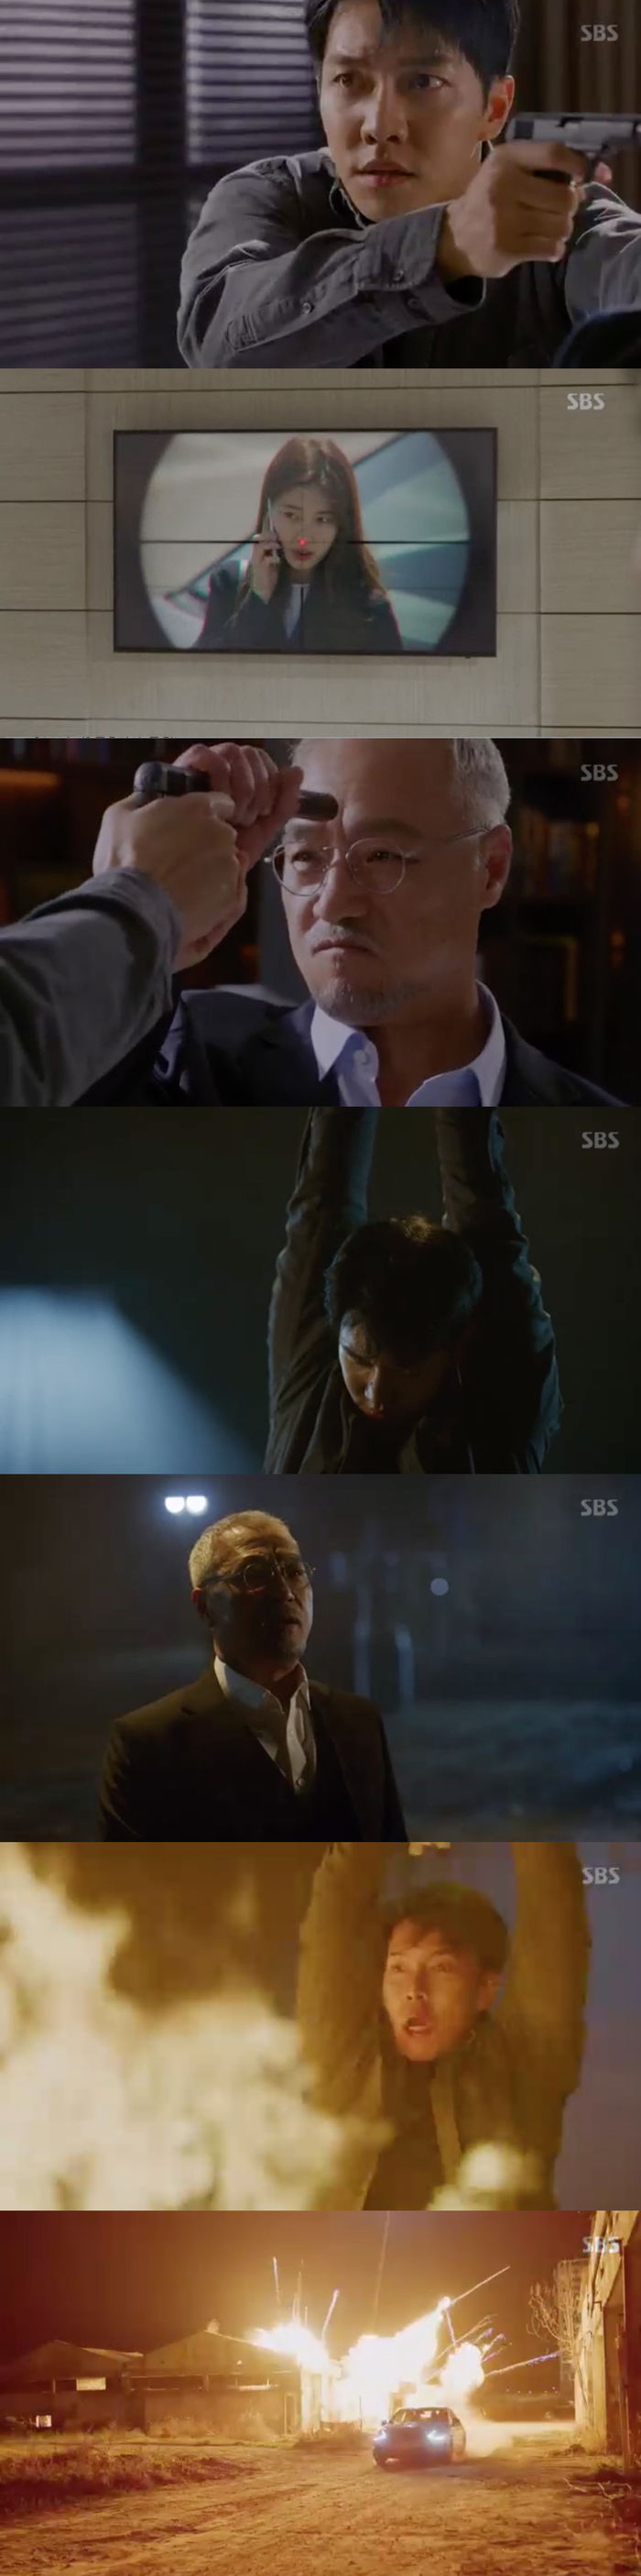 Can Lee Seung-gi escape the Danger of Death?In the 15th episode of SBS gilt drama Vagabond broadcast on the 22nd, the figure of Cha Dal-gun (Lee Seung-gi) who fell into Danger was drawn.On the show, Chadalgan noticed that Prince Edward Island (Lee Gyeung-young) was Samael behind all the incidents.He tracked him down after learning that Jerome (Jew Tae-oh), the plane bomber, was from an American mercenary named Black Sun.And he went to see Prince Edward Island, who was willing to help.And Cha Dal-geon recounted the history and assumed that Mickey, secretary of Prince Edward Island, was Michaels girlfriend.He then used his base at the meeting with Prince Edward Island and Mickey to identify the same tattoo as Jerome on Mickeys wrist.All that has been done so far has been done by Prince Edward Island, a Samael, who told Prince Edward Island: I said Samael before Oh died.You know the prick? and overpowered Prince Edward Island, who attacked him.Prince Edward Island has used the chadal gun so far to get what he wants: You think Ive done it just to get a fighter business.You dont know how to turn around. I dont know why crime on earth doesnt go away. Money moves when theres sin. I want my country to live well.A strong country where people can live and live. That is justice. I will not stop the wheels because I kill one of you, because there are many people to replace you, he said. He released a video showing the bereaved families and Gohari (Bae Su-ji) to Cha Dal-gun.He was aiming for bombs where the families gathered, and a sniper to the confessional.Prince Edward Island said: If you dont put this gun away, youll see a terrible sight with your eyes, put this gun down or the bereaved and the confessional will die.Because of you, he threatened. So he finally got out of the gun.Prince Edward Island then locked a chadalgun and Kim if, who knew his existence, in a warehouse and sprayed gasoline around them, and reported the situation to someone.Prince Edward Island left behind Chadalgan and Kim if, saying: Dont be sorry, I think youll meet someone you miss earlier, Good Luck.He then activated the ignition and the warehouse where the two were trapped exploded and shocked.